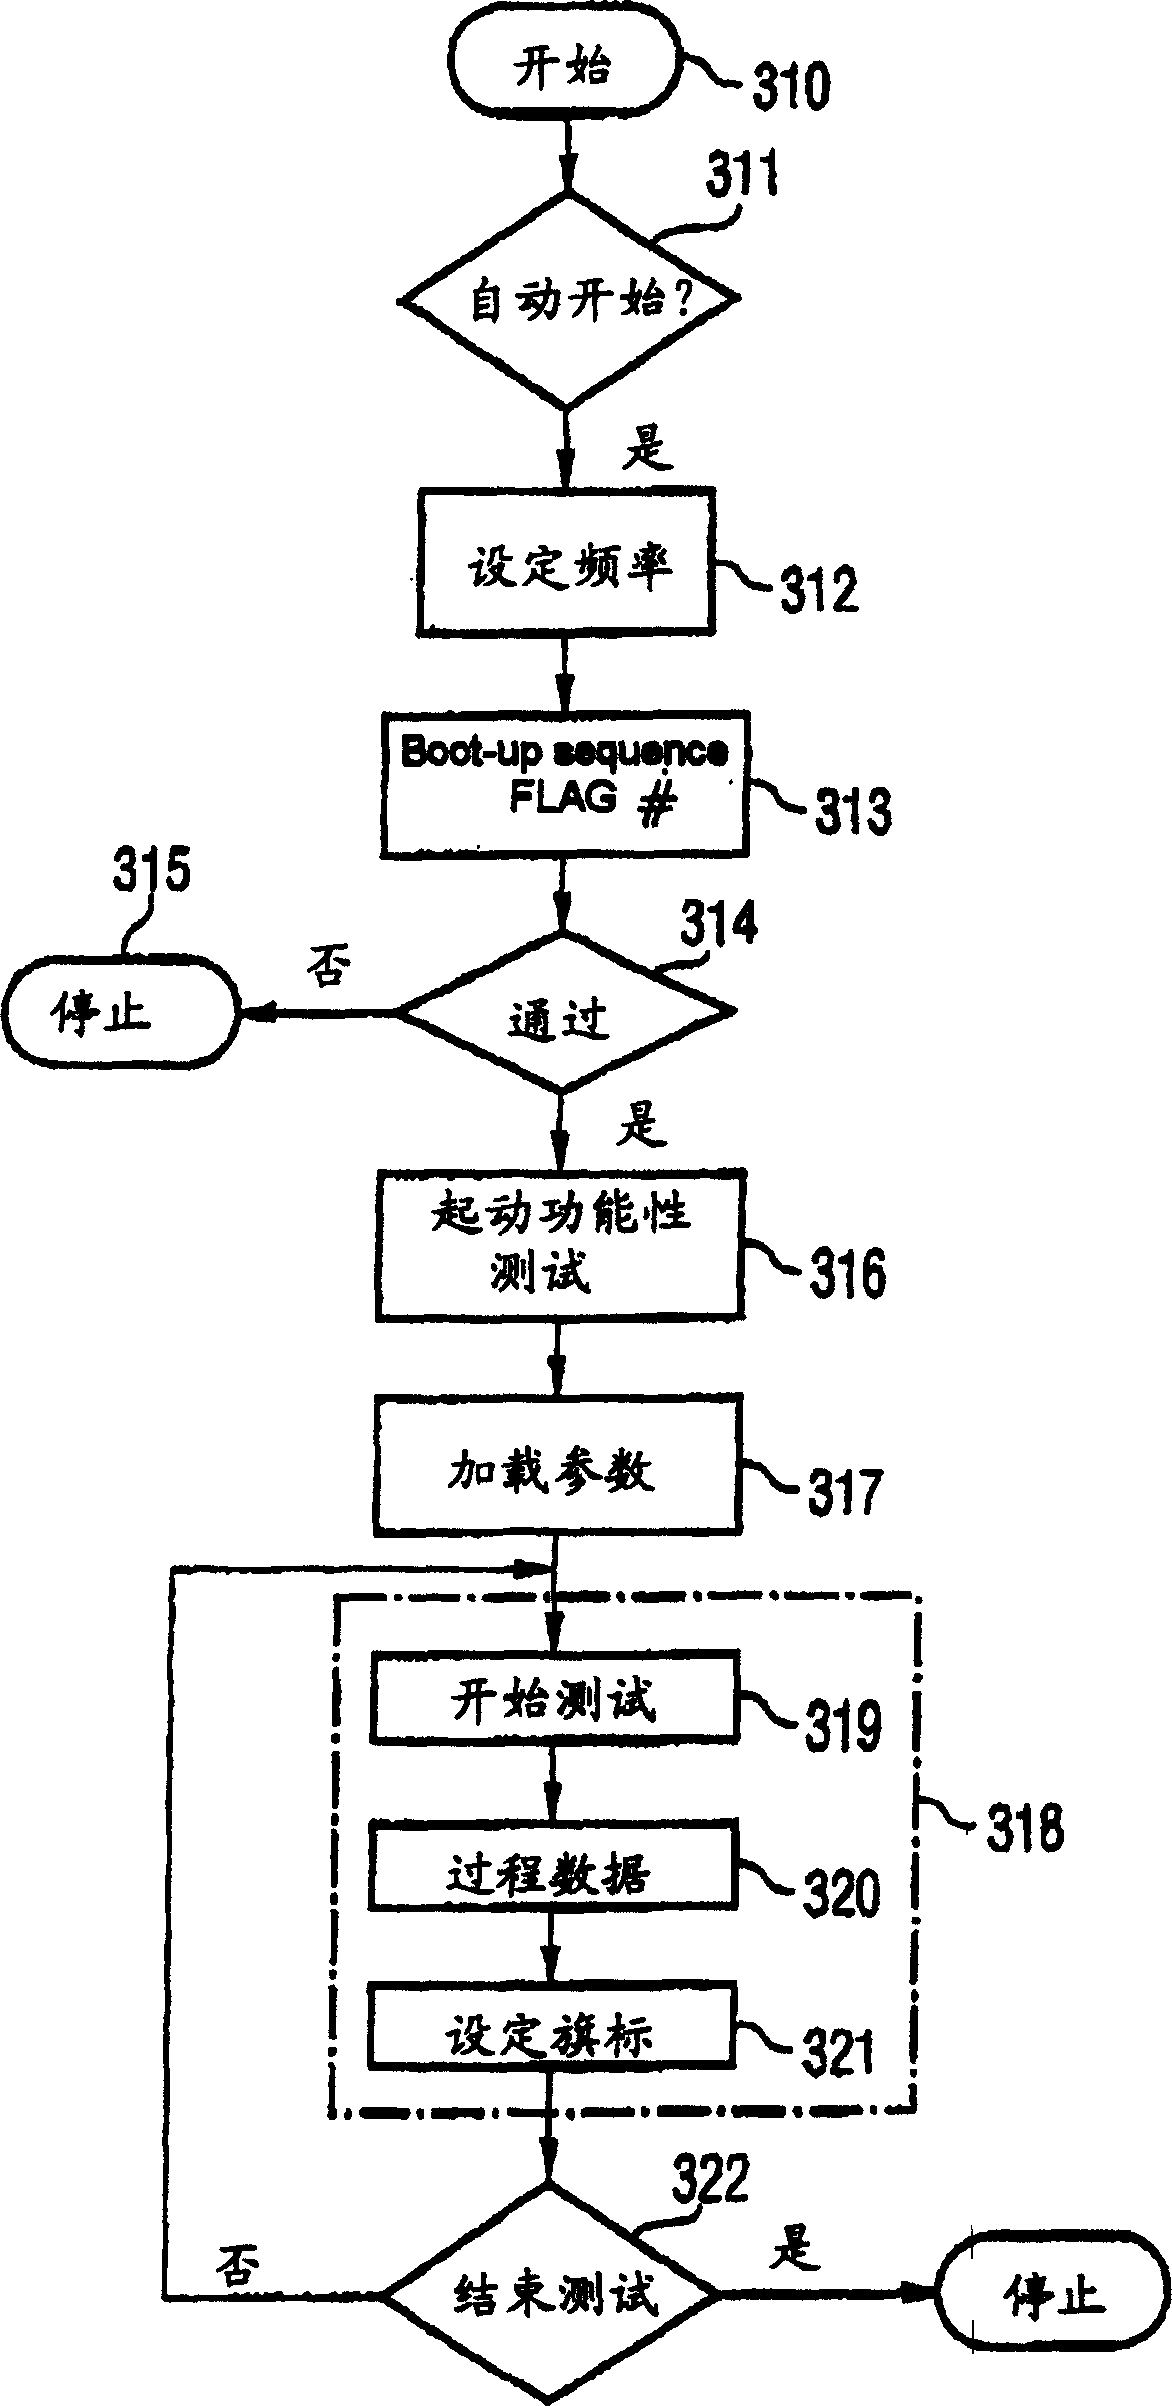 Semiconductor circuit and method for testing, monitoring and application-near setting of a semiconductor circuit